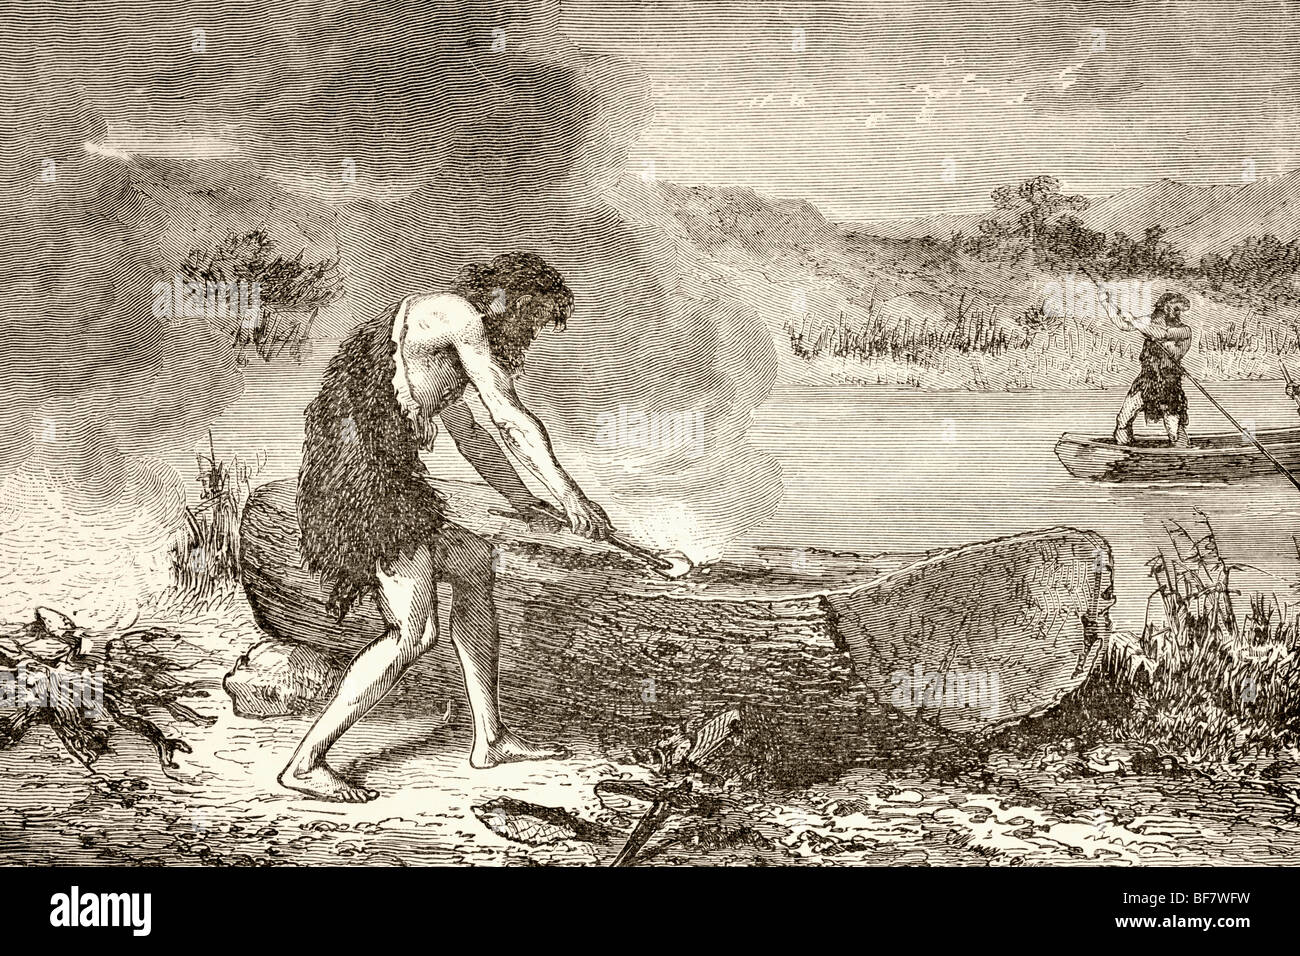 A prehistoric man using fire to fashion a canoe from a log Stock Photo